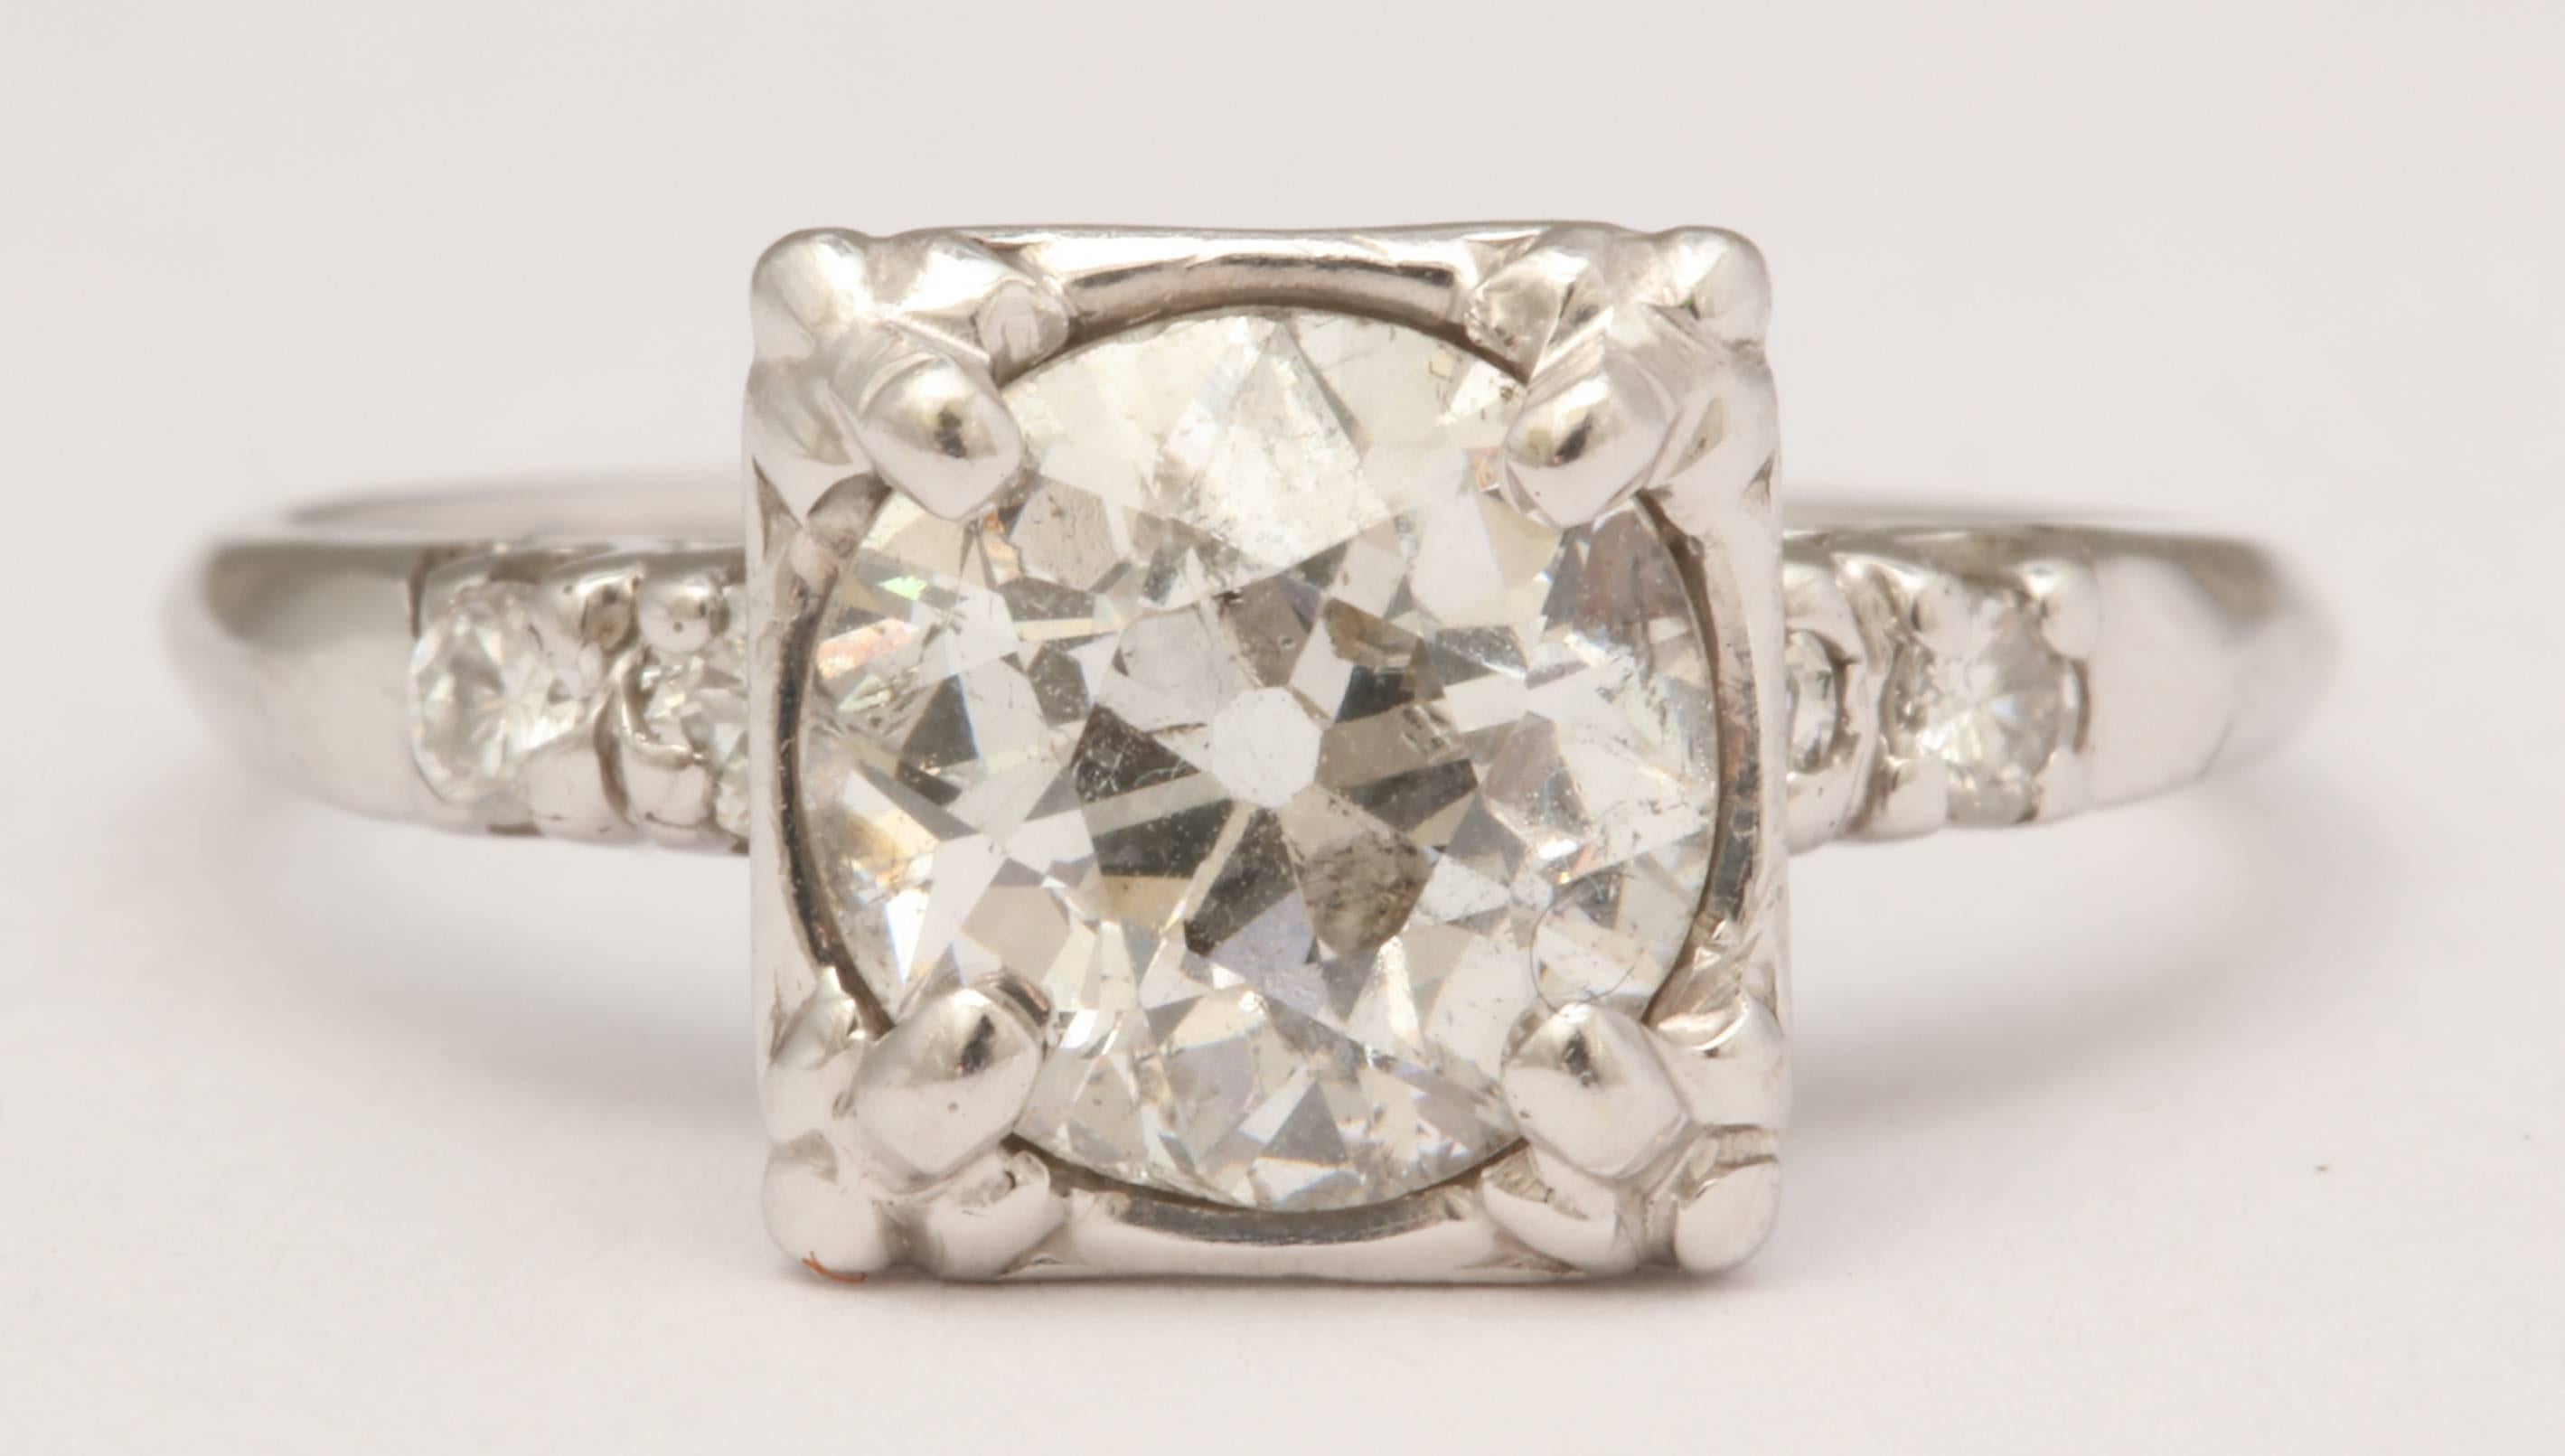 14K white gold and diamond 1930's engagement ring with a 1.50ct Old European Cut center stone set in a square shaped head. 2 single cuts are set into each shoulder. EGL certified: G-H, SI3. Although the center diamond has a low clarity, to the naked